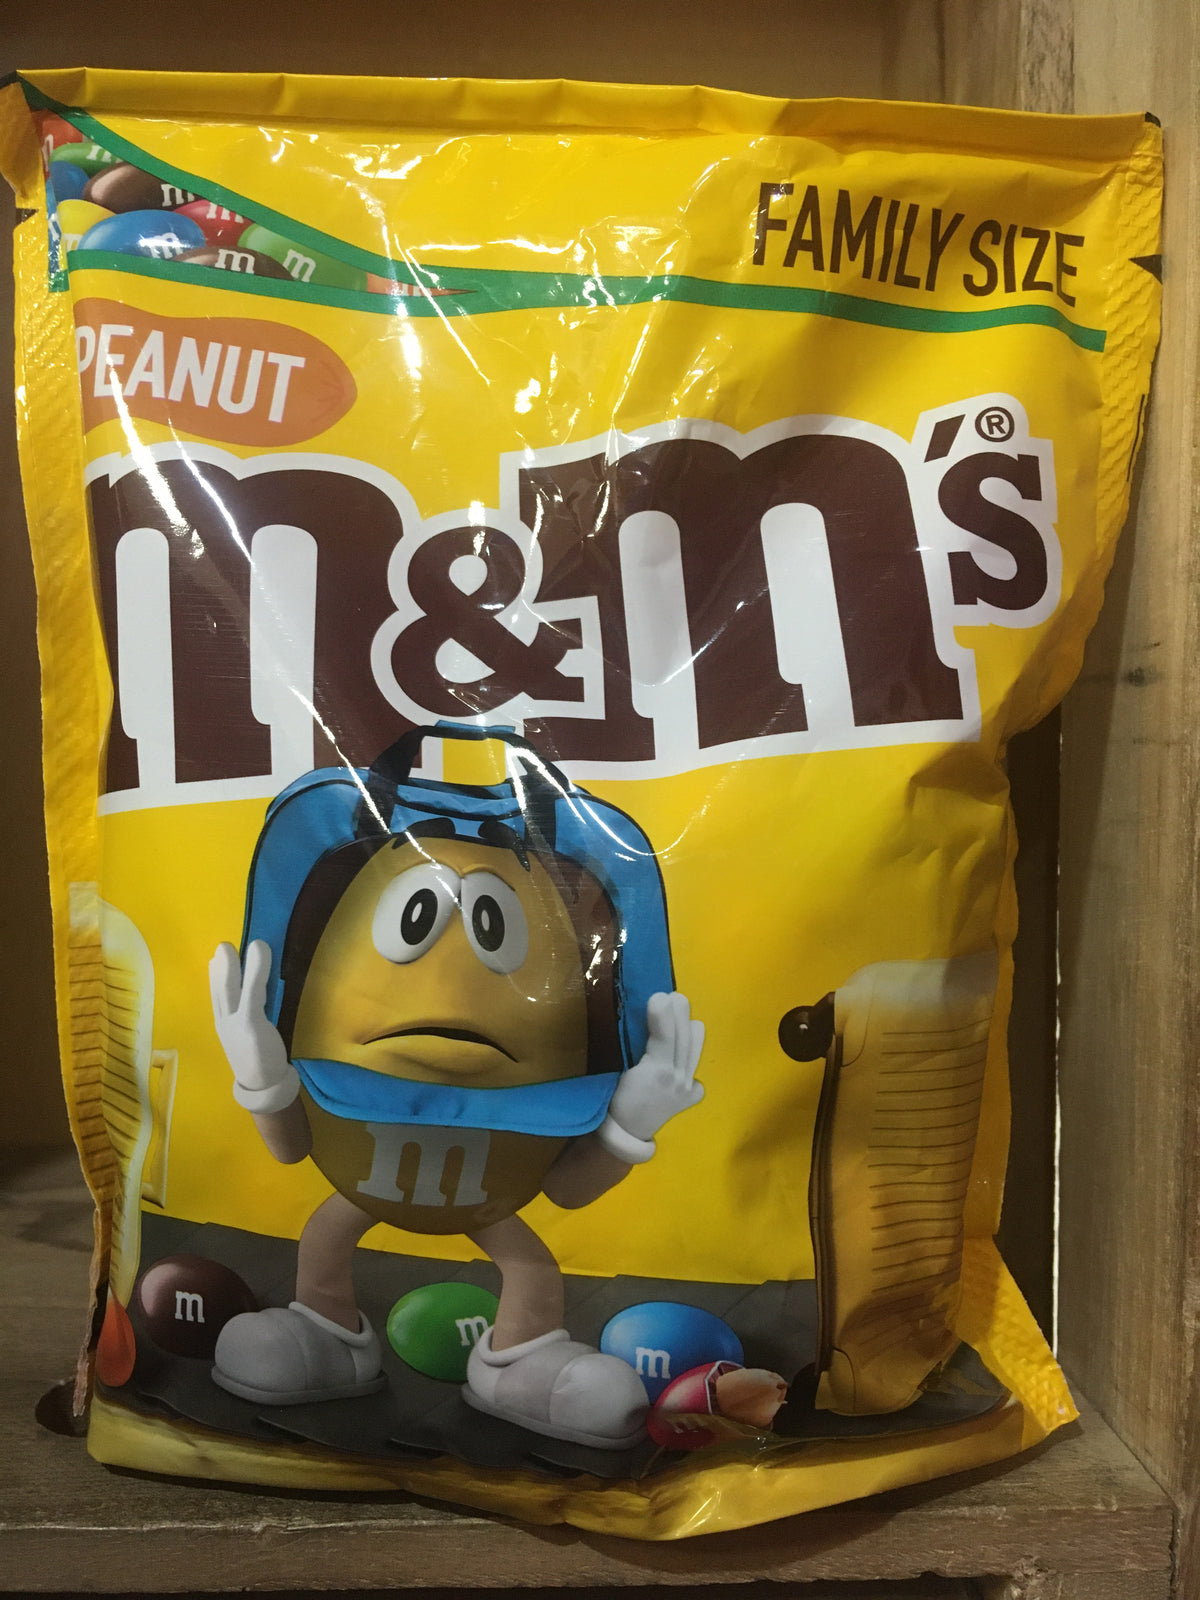 Check out our collection of 1.32kg of M&M's Peanut (3 Packs of